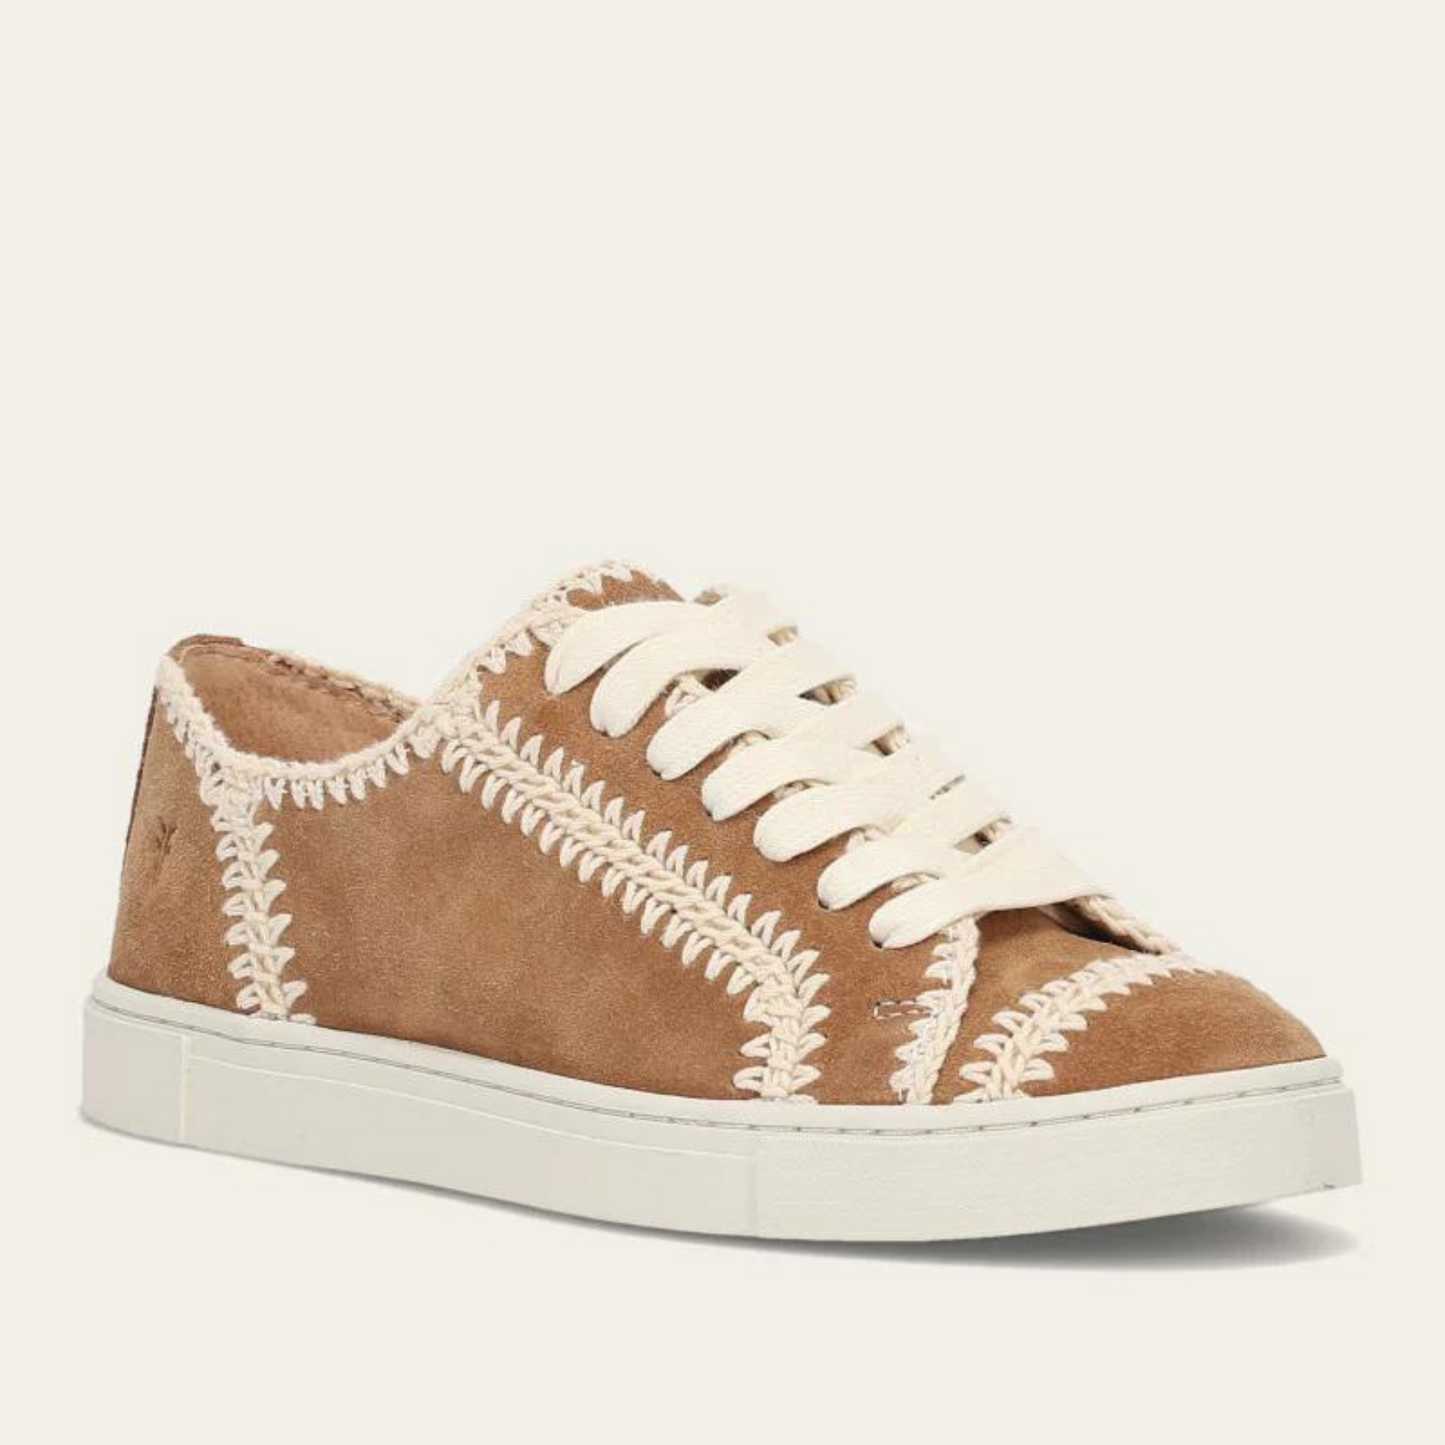 Women's almond color crochet stitched low top lace up sneaker by FRYE